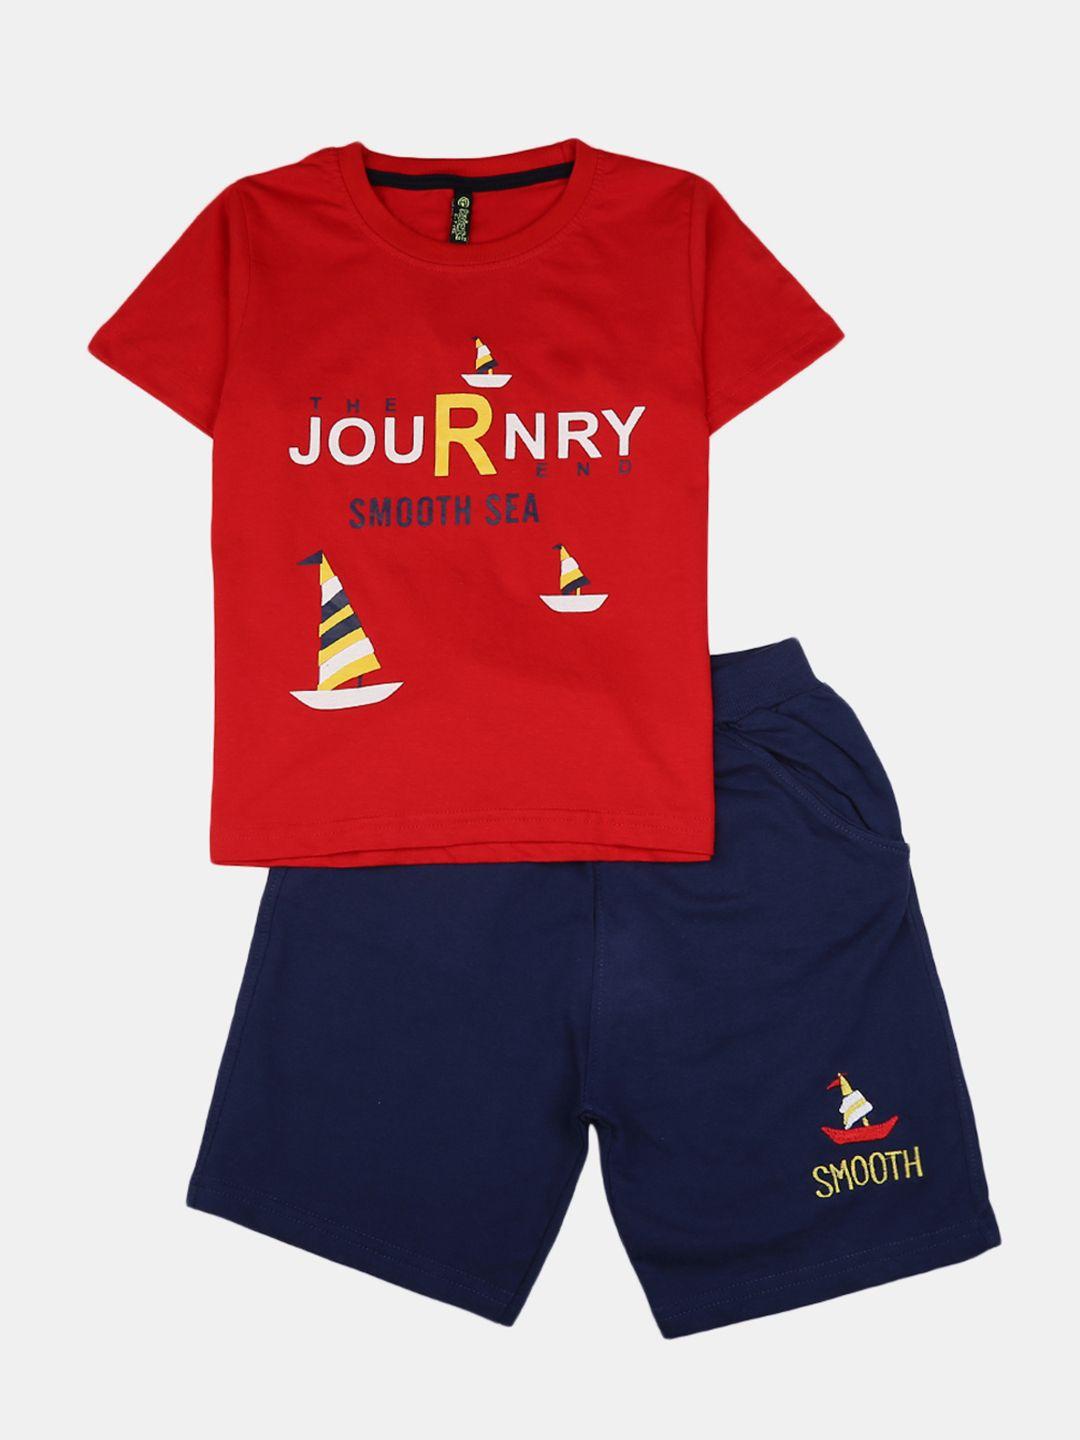 v-mart unisex kids red and navy blue printed pure cotton t shirt with shorts